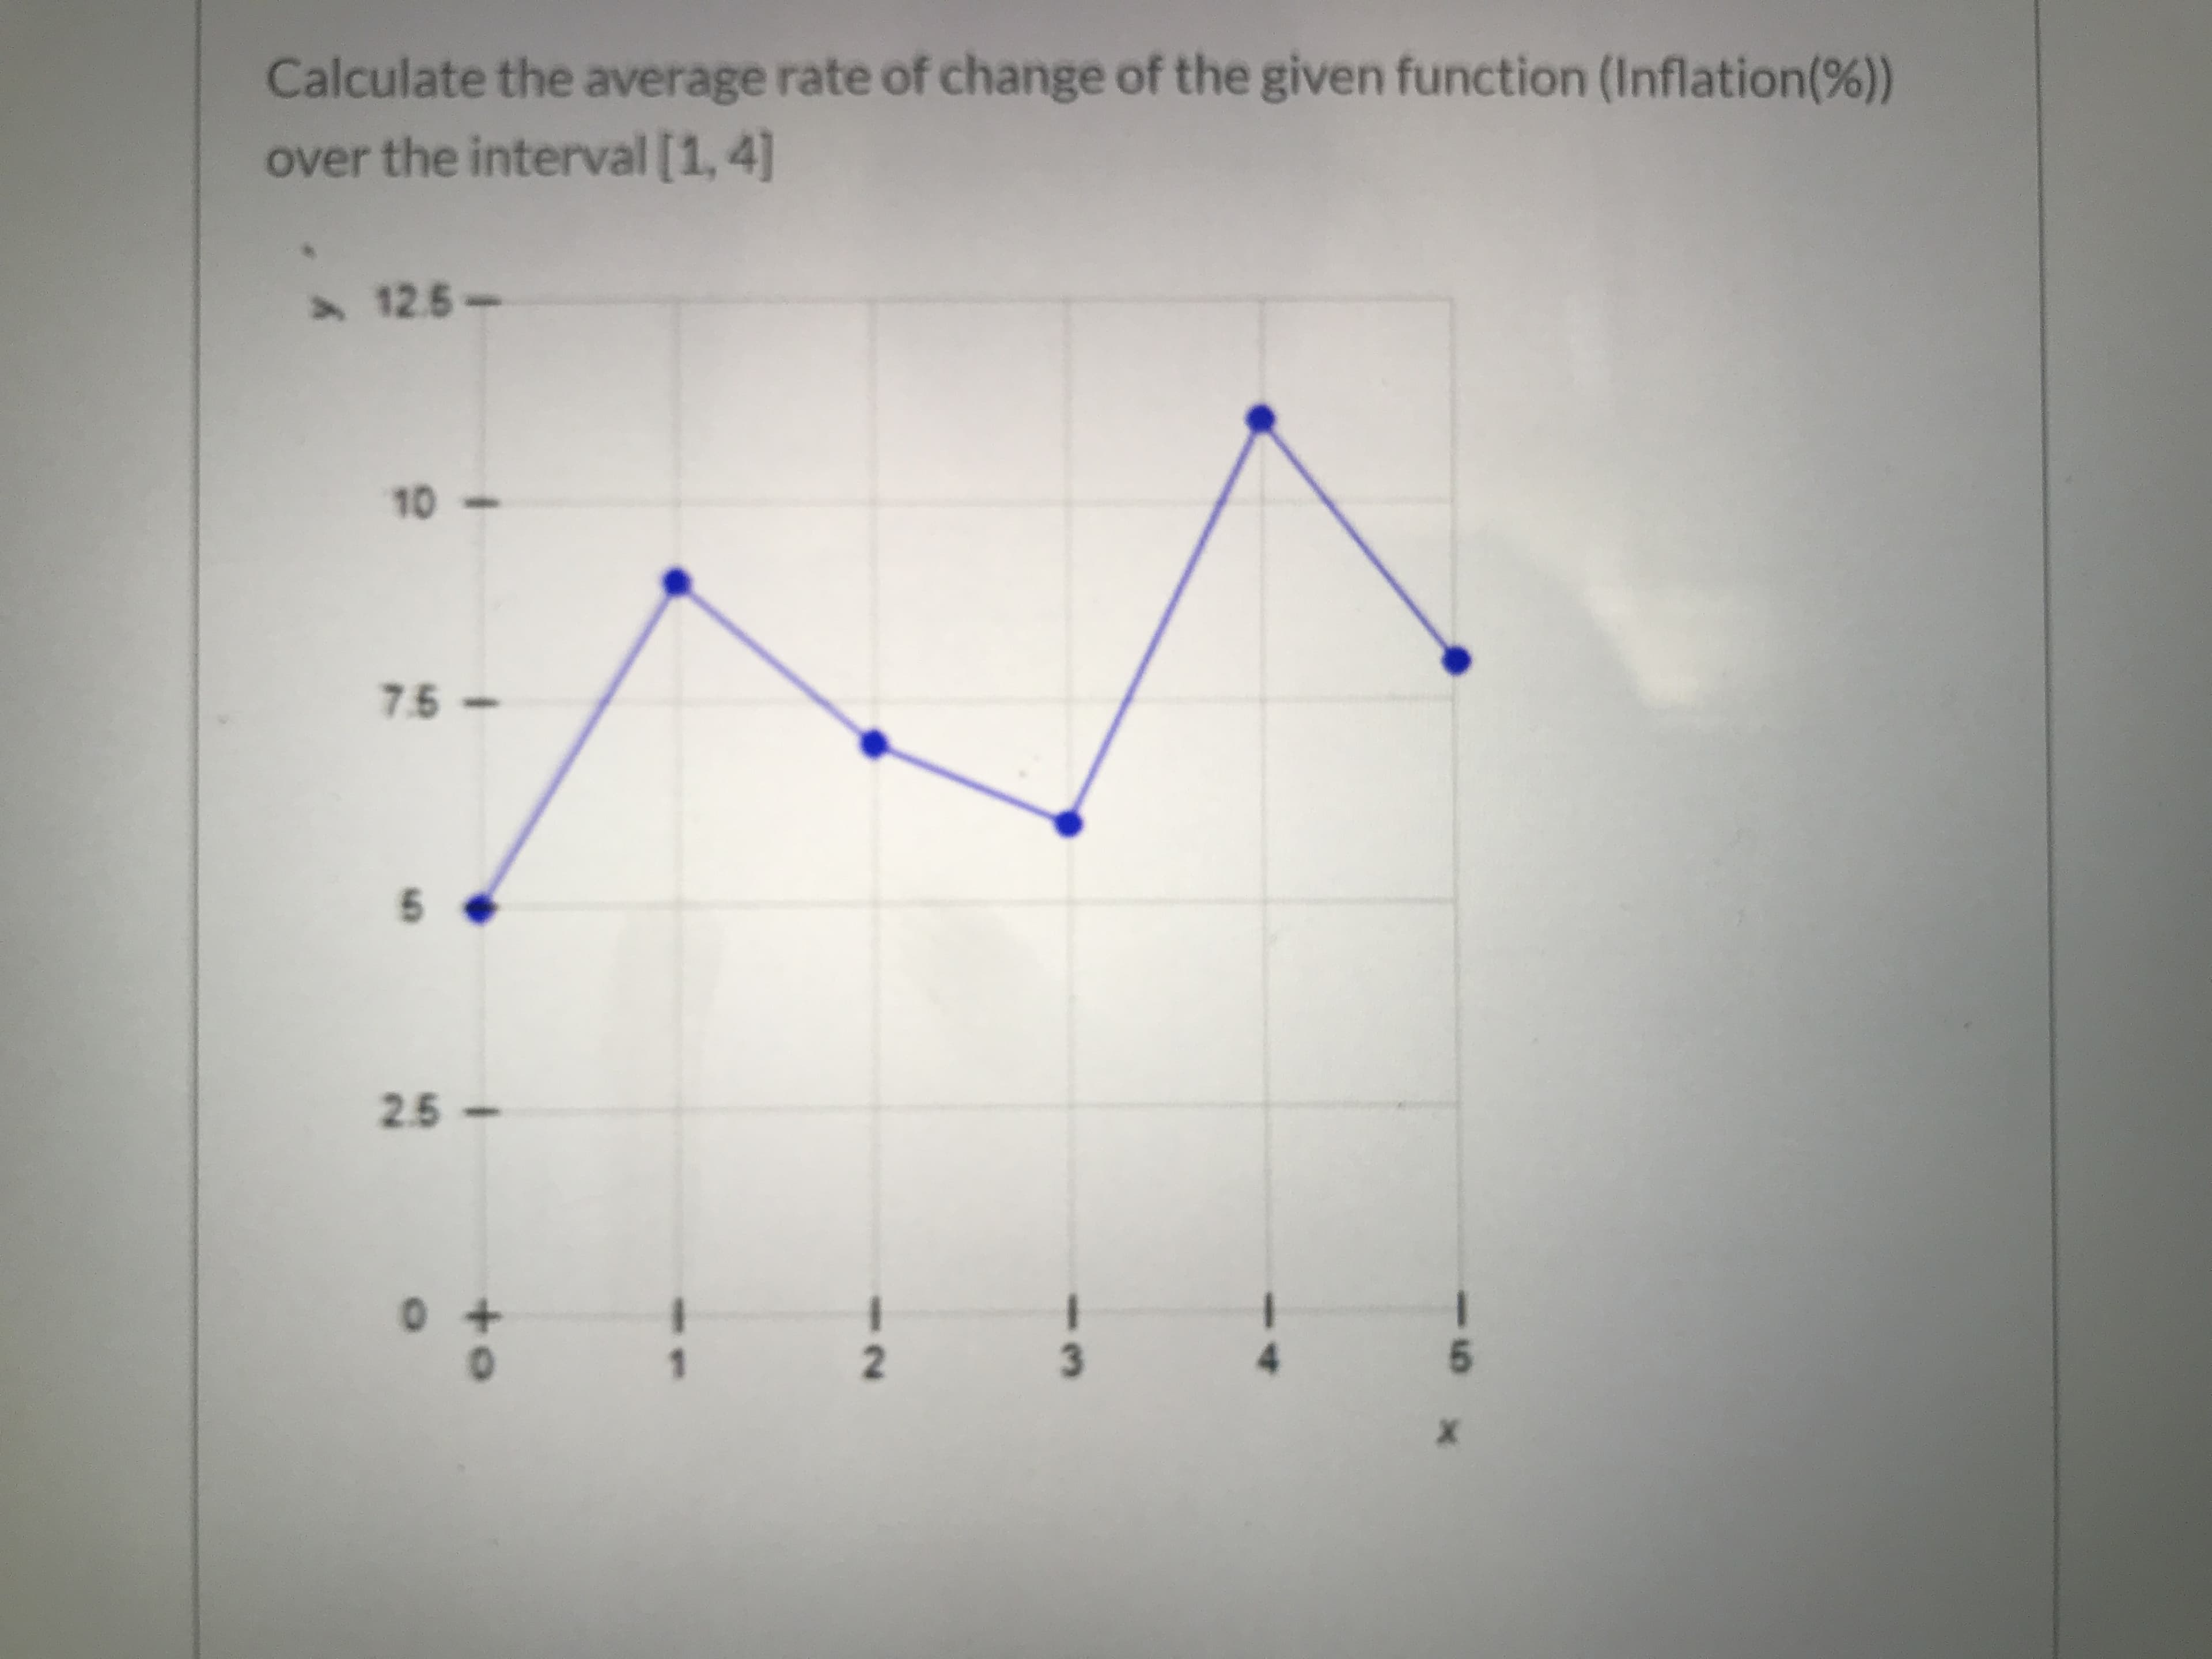 Calculate the average rate of change of the given function (Inflation(%))
over the interval [1, 4]
5 12.5-
10
7.5-
25-
2.
5.
5.
